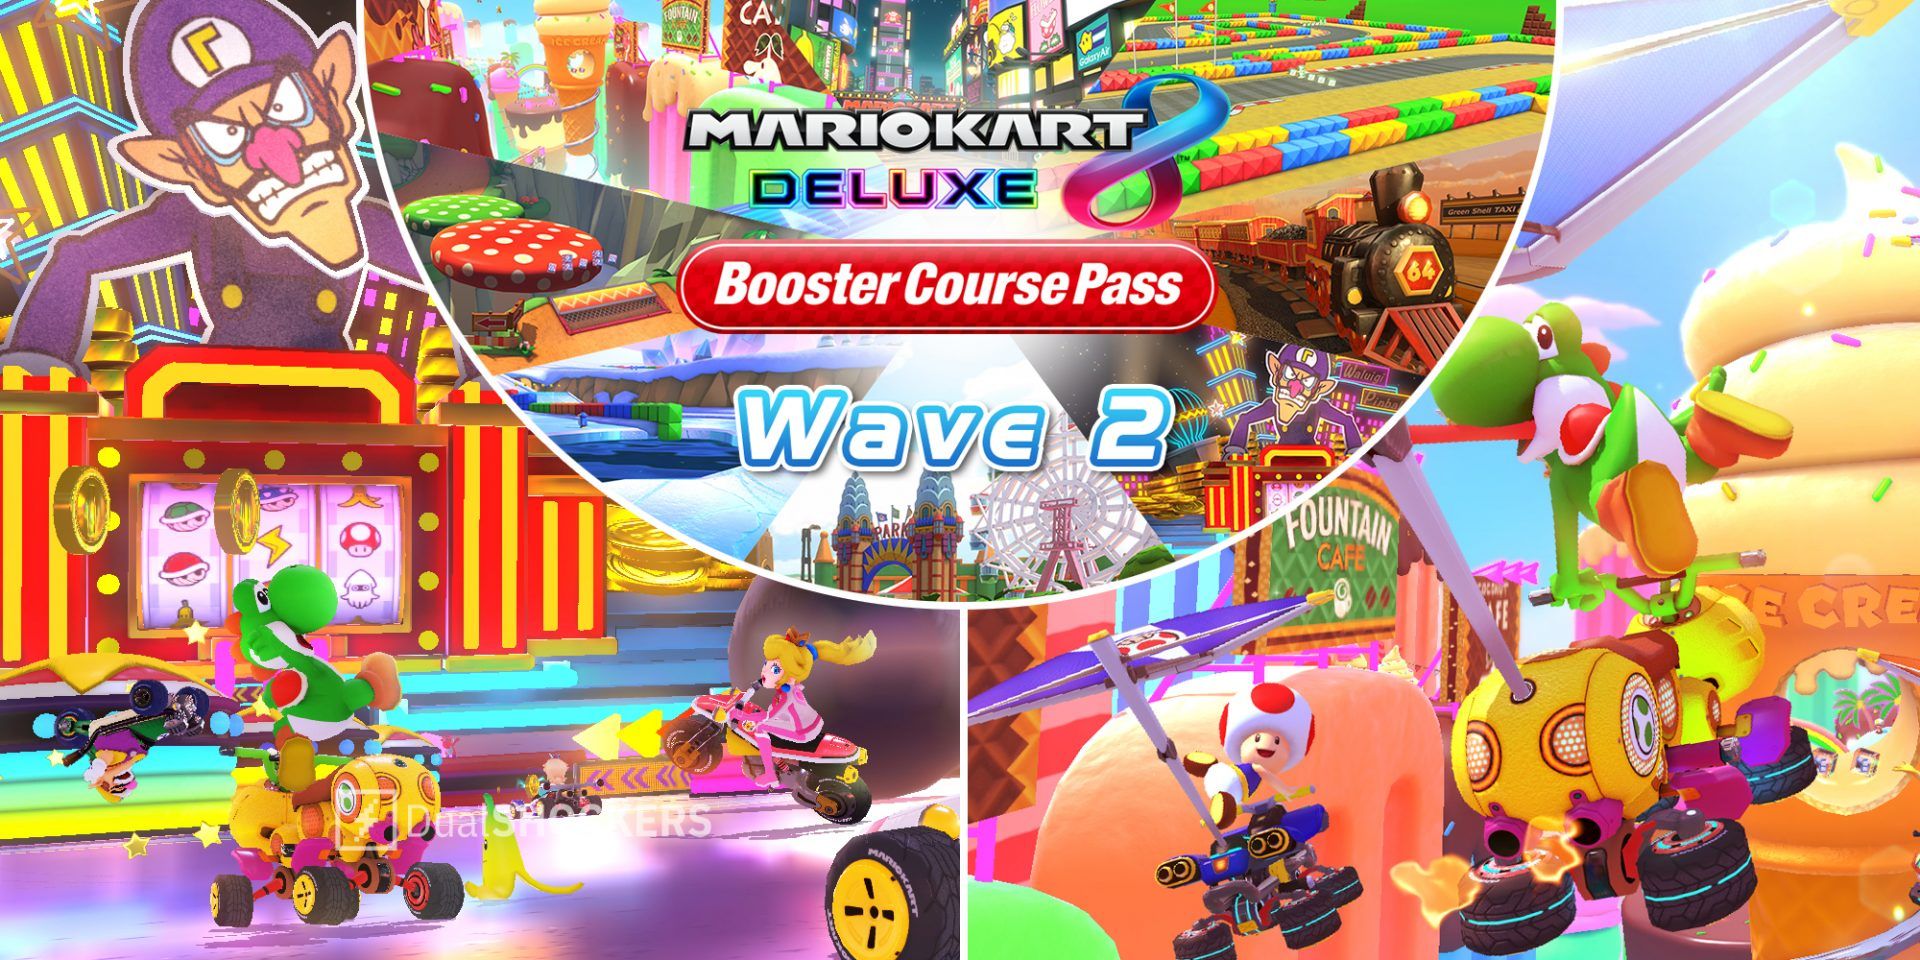 Mario Kart 8 Deluxe Waluigi Pinball course on left, Booster Pass Wave 2 promo in middle, Sky-High Sundae course on right